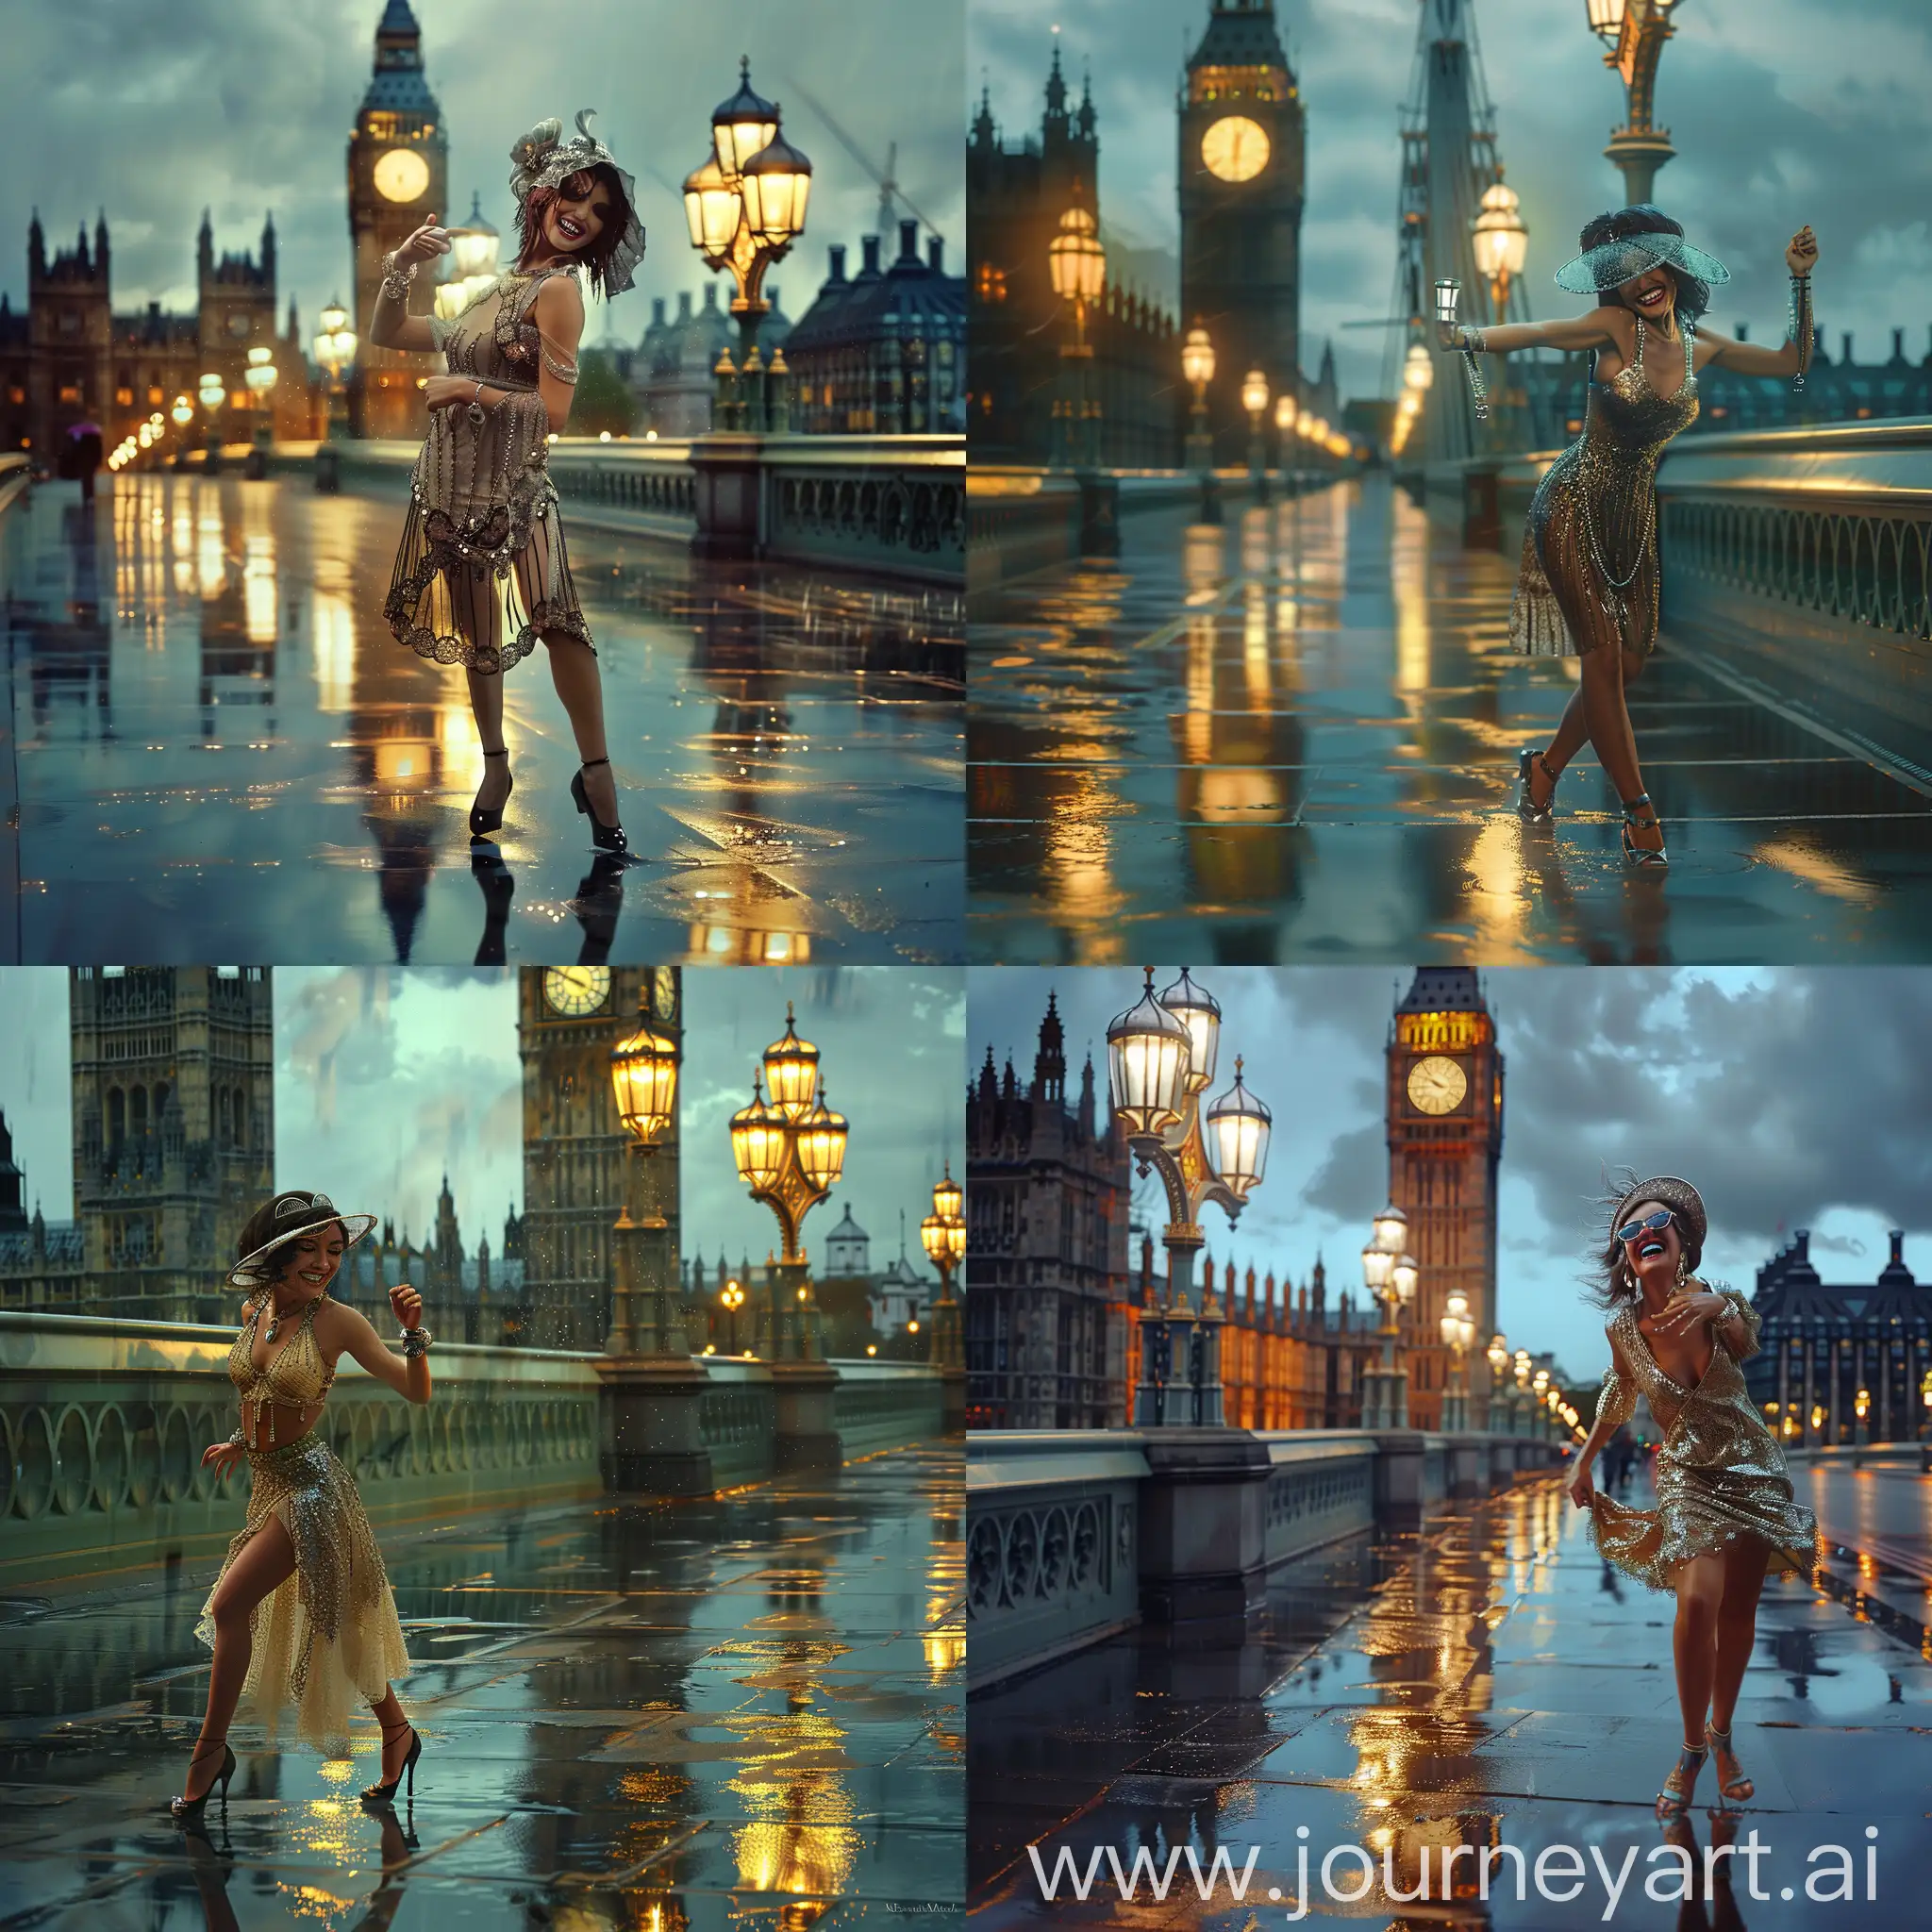 A highly detailed photographic image of a beautiful smiling 1920s flapper woman.  she is dancing in the rain on Westminster bridge, London.The street lamps are reflected on the wet pavement. Beautiful magical mysterious fantasy surreal highly detailed